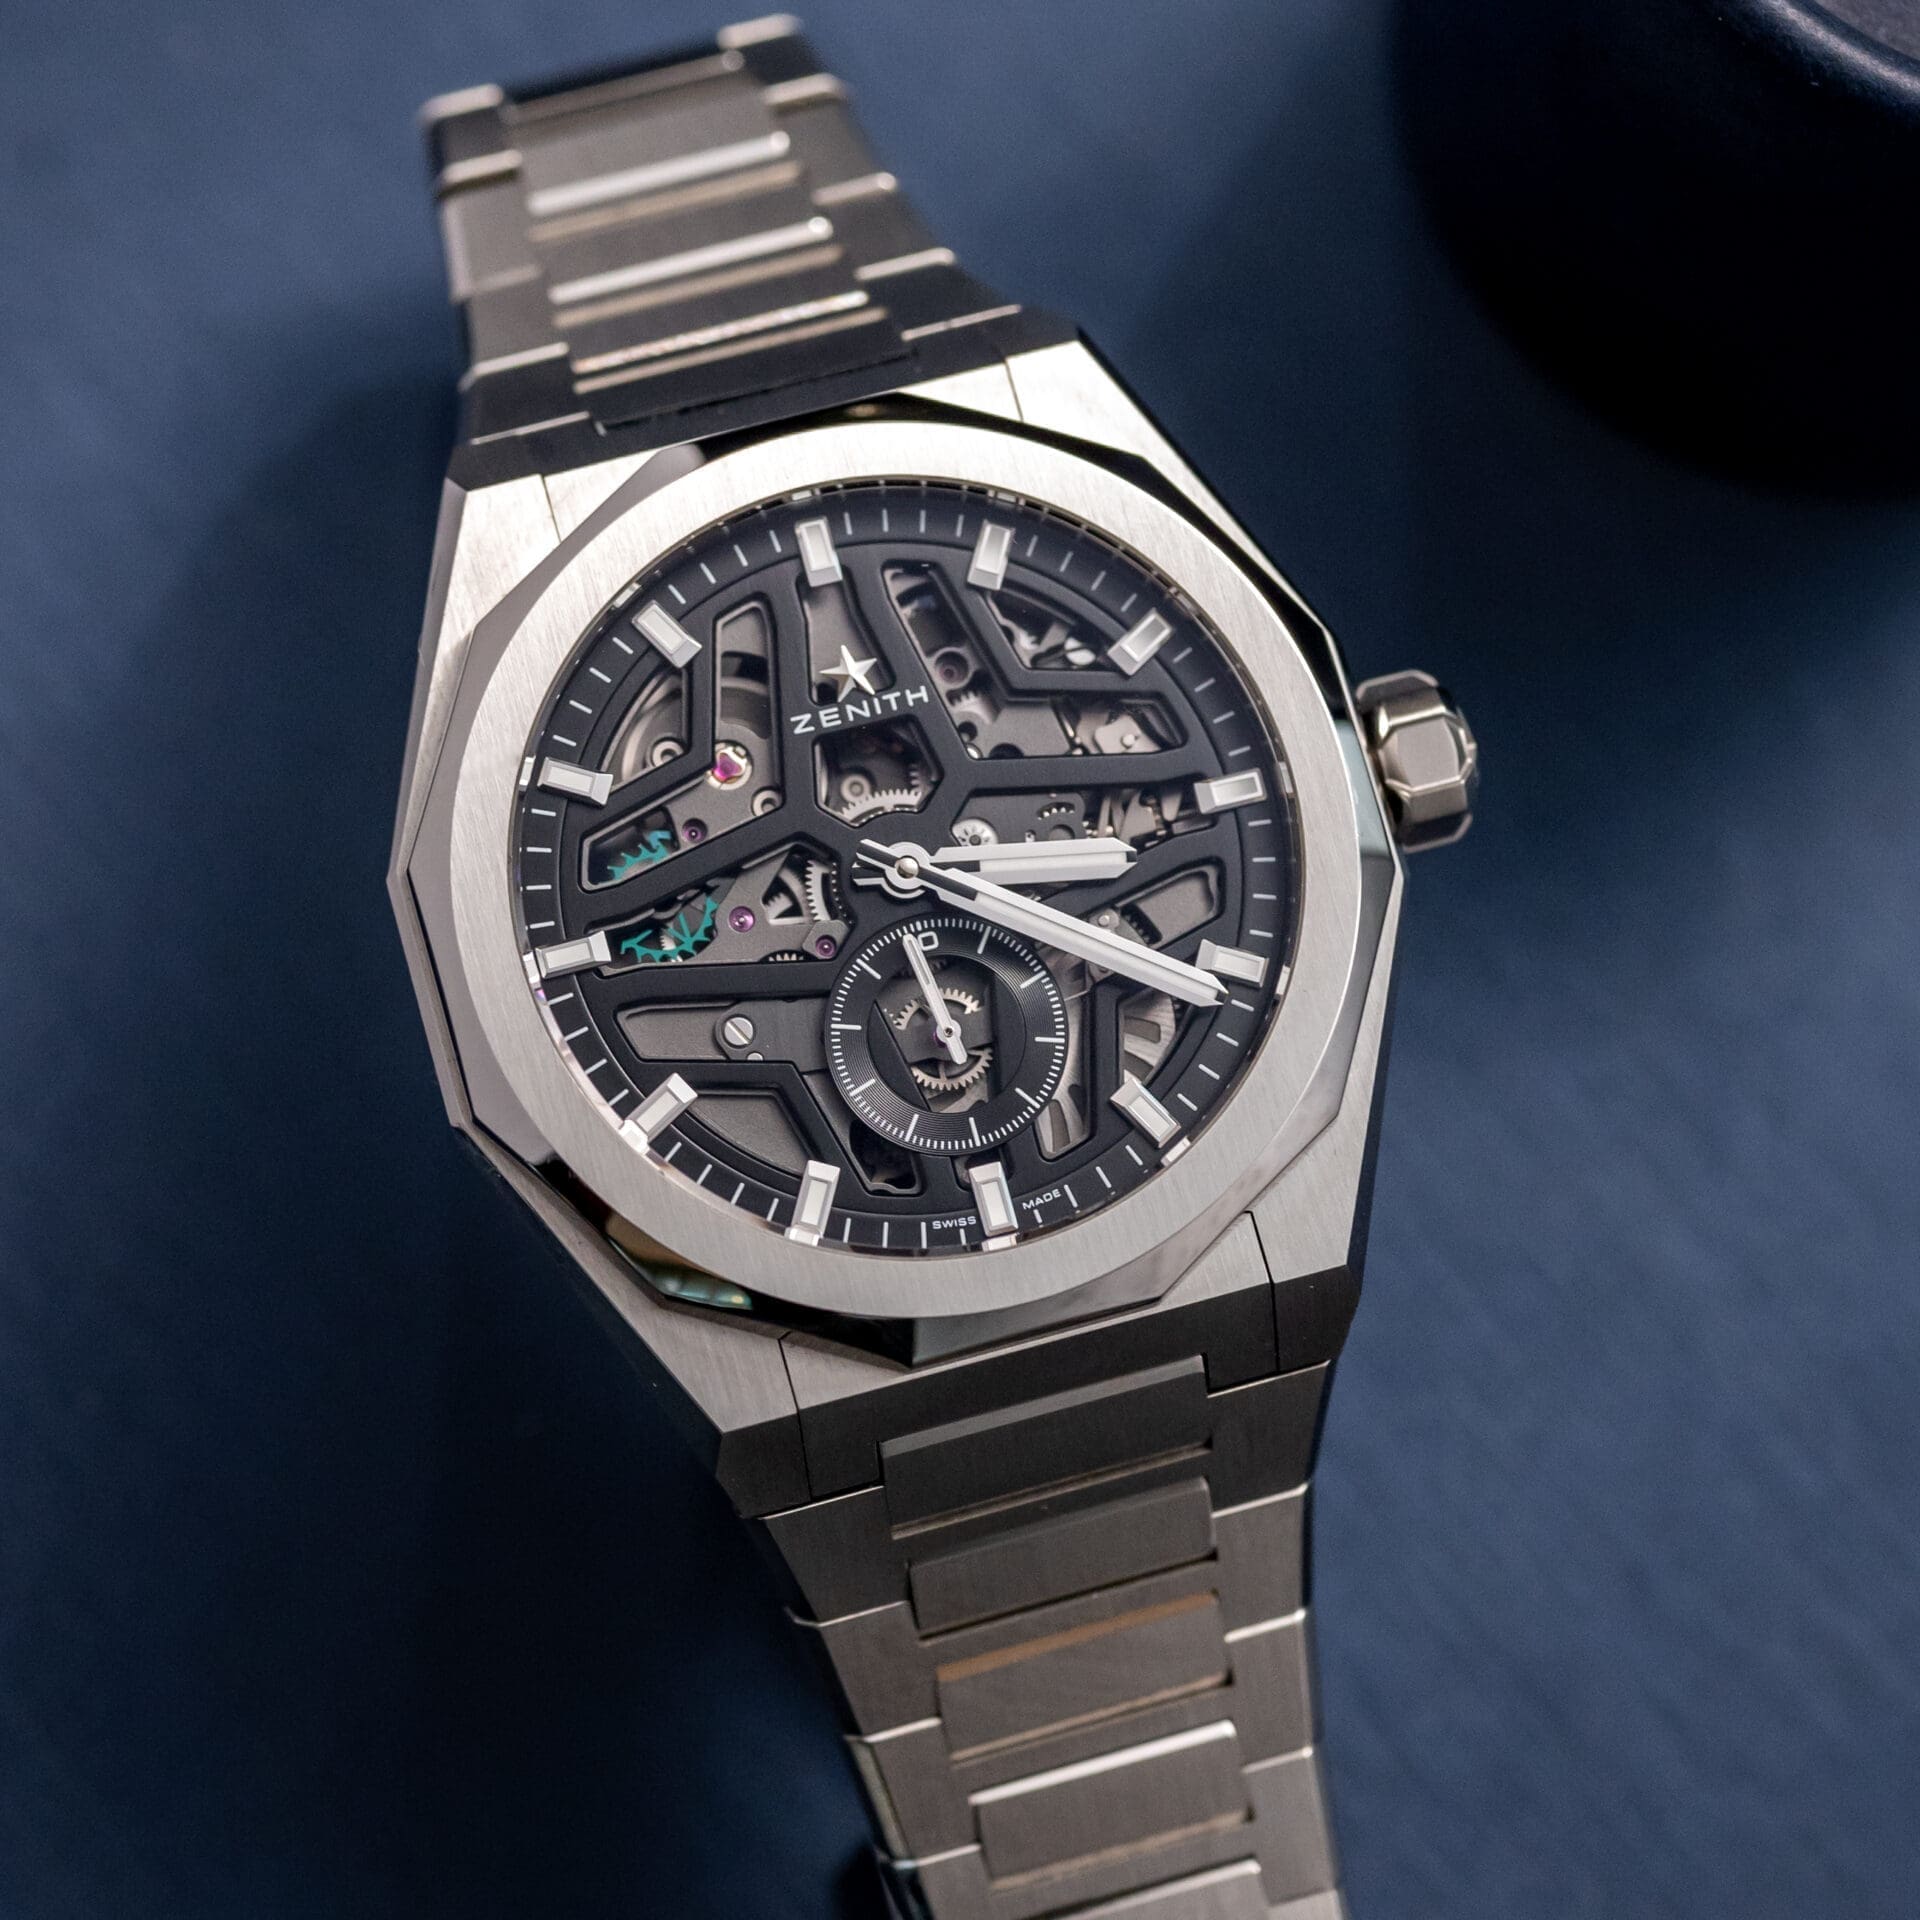 HANDS-ON: The new Zenith Defy Skyline Skeleton is a superstar in their 2023 lineup